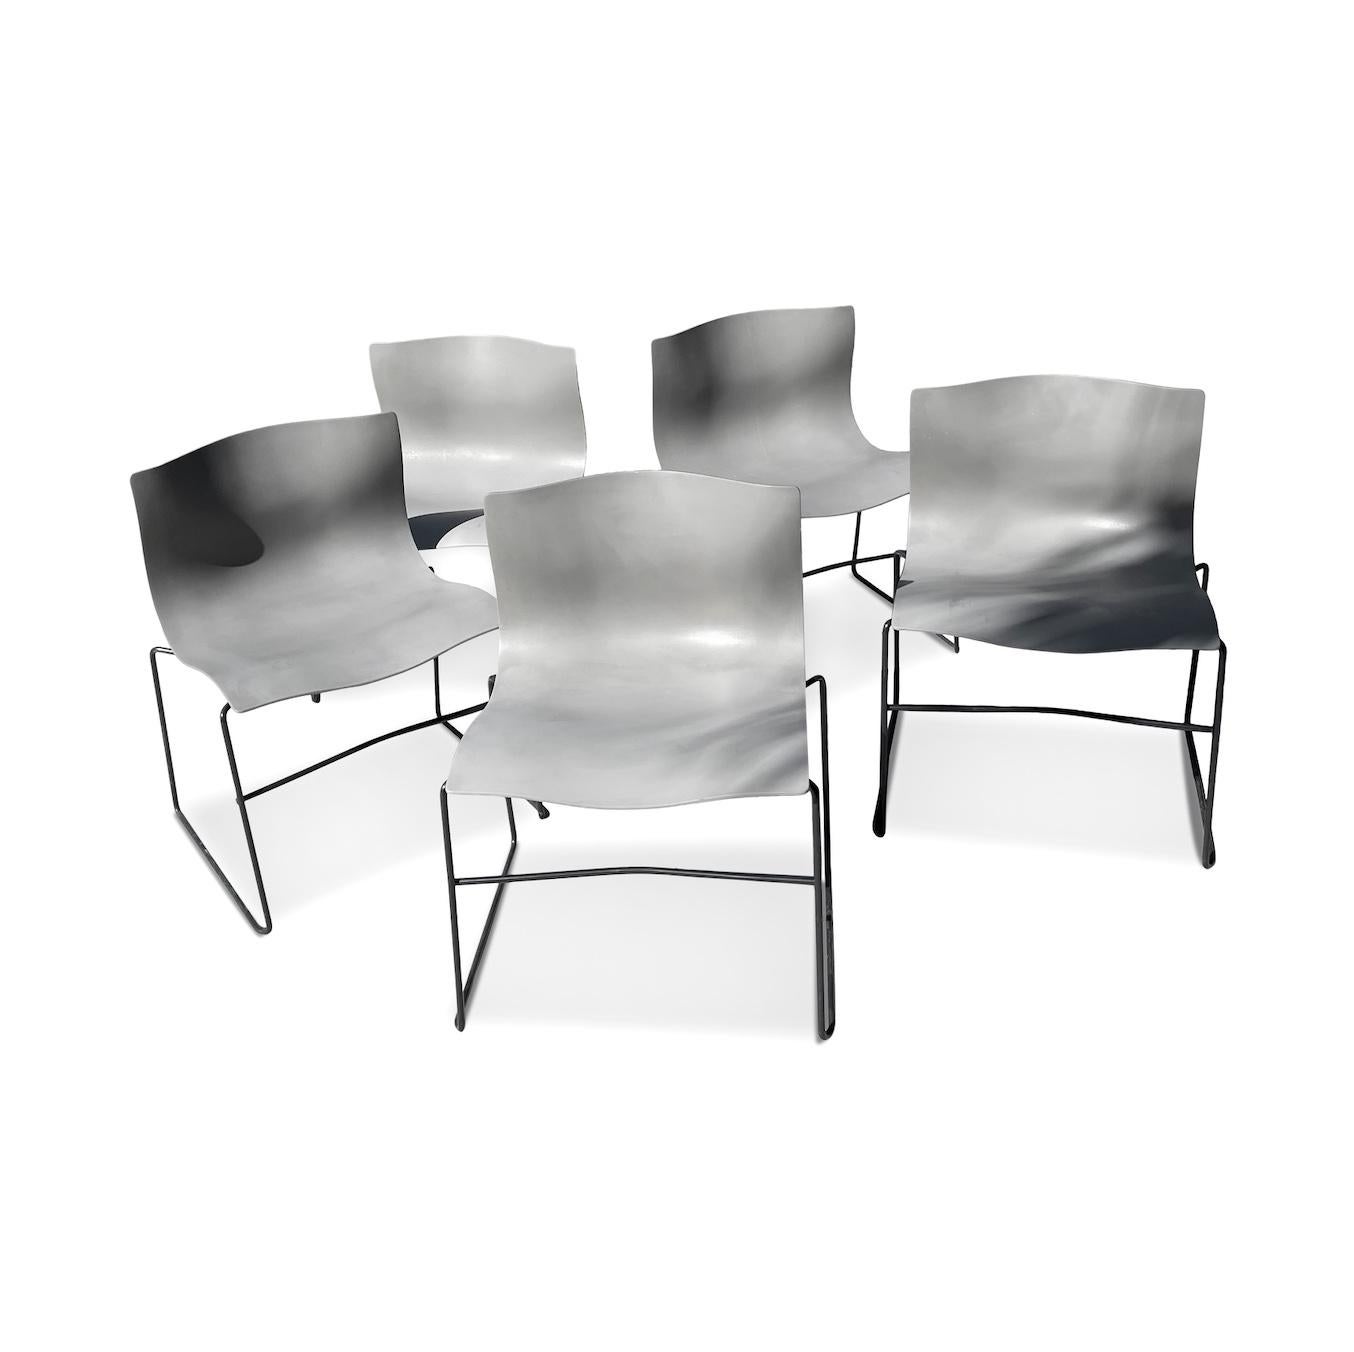 An iconic duo in modern design, Lella and Massimo Vignelli designed the Handkerchief Chair for Knoll in 1983 and it was released in 1985. Stackable with a generous seat and back, as well as organic lines suggestive of a handkerchief floating in the